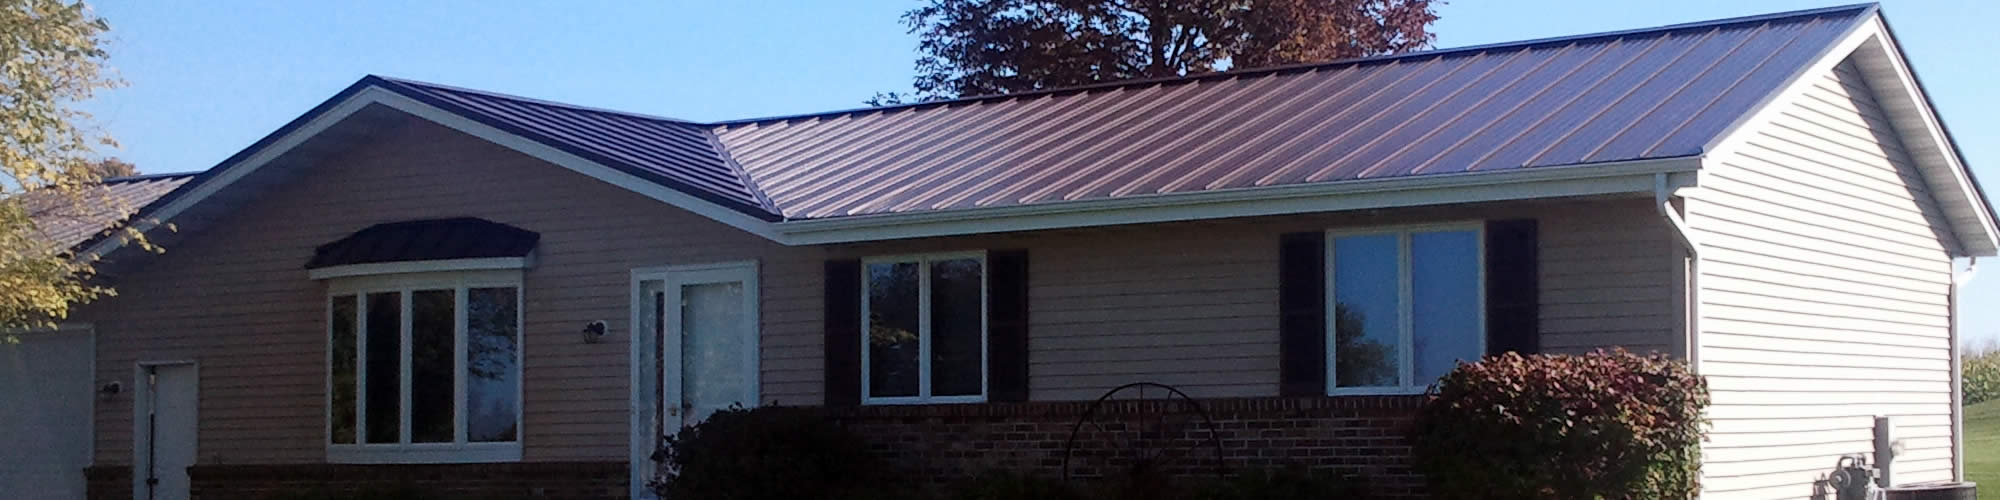 Standing Seam Metal Roofing Contractor near me